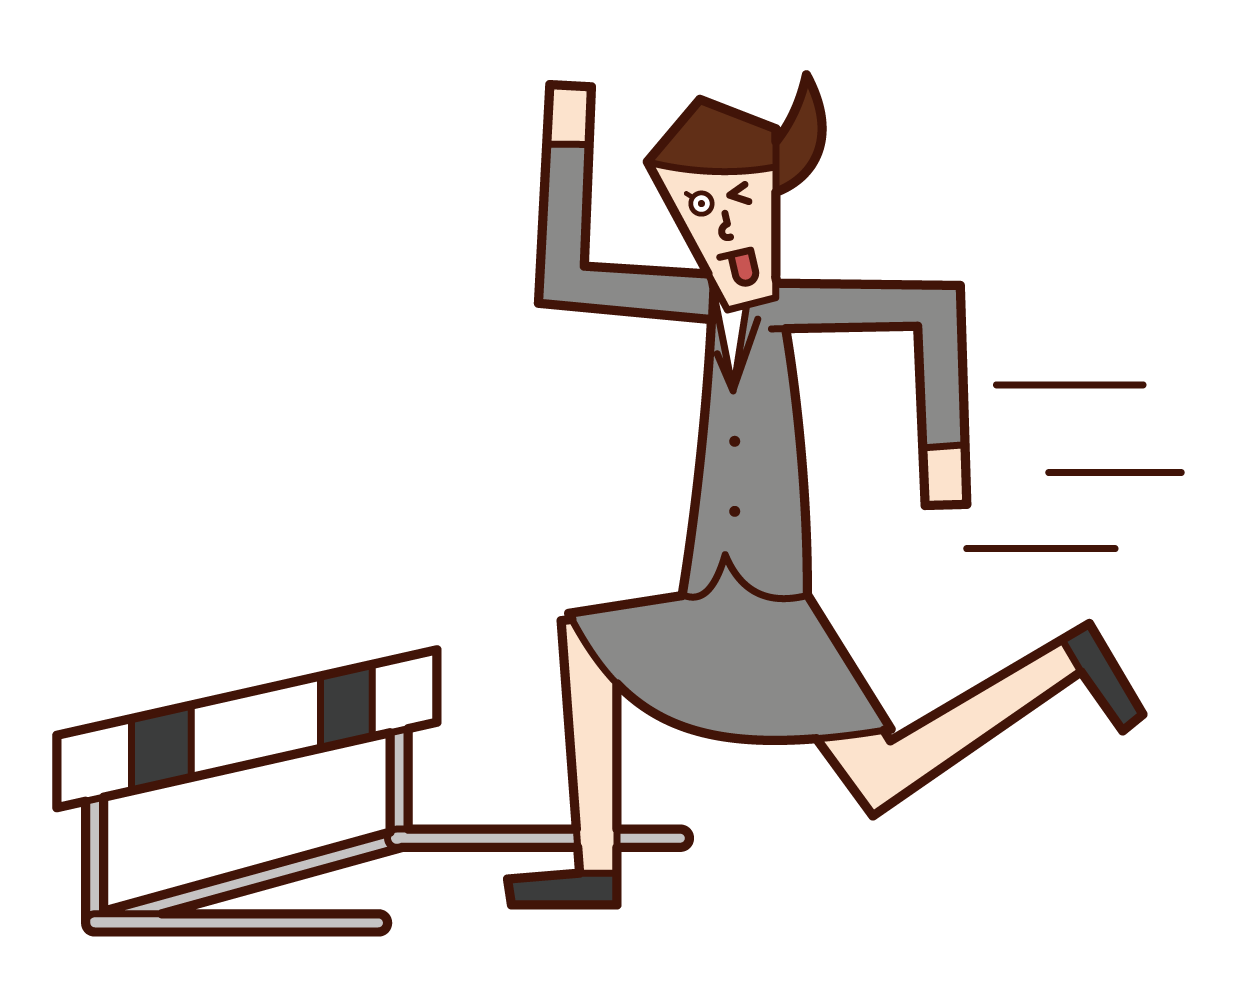 Illustration of a woman jumping over a low hurdle